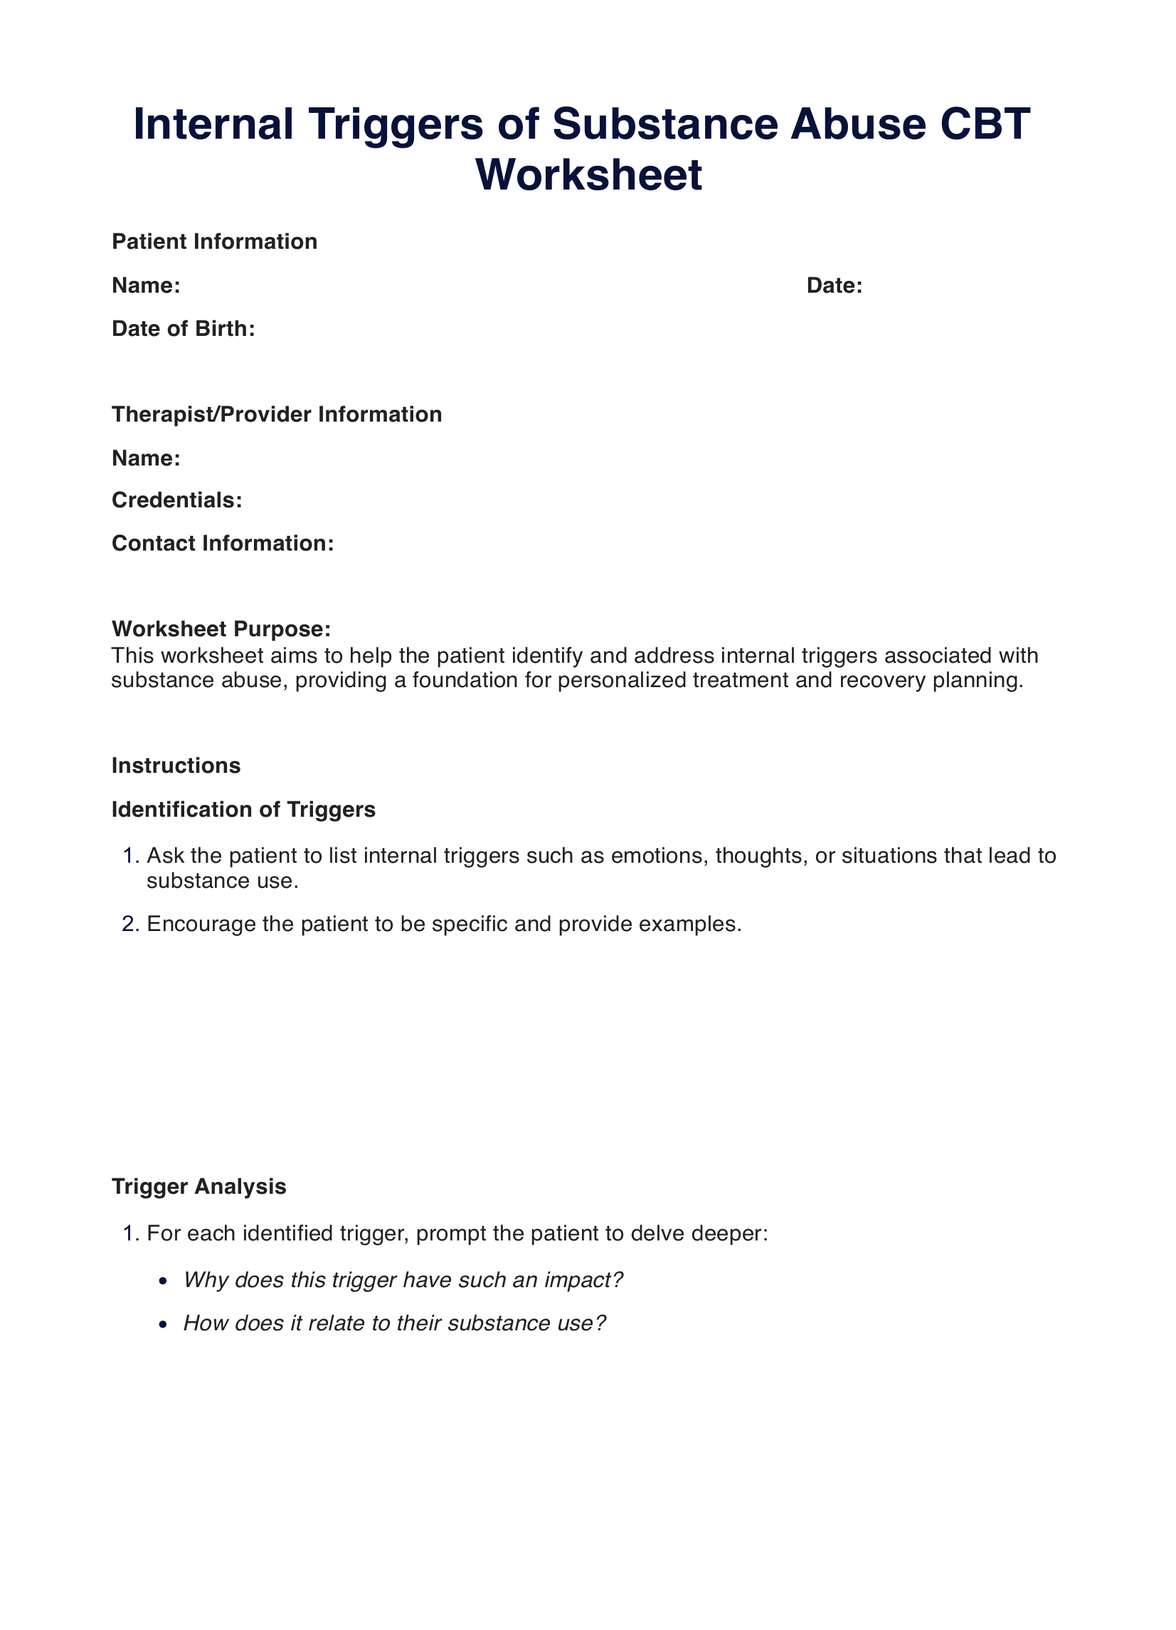 Internal Triggers of Substance Abuse CBT Worksheet PDF Example